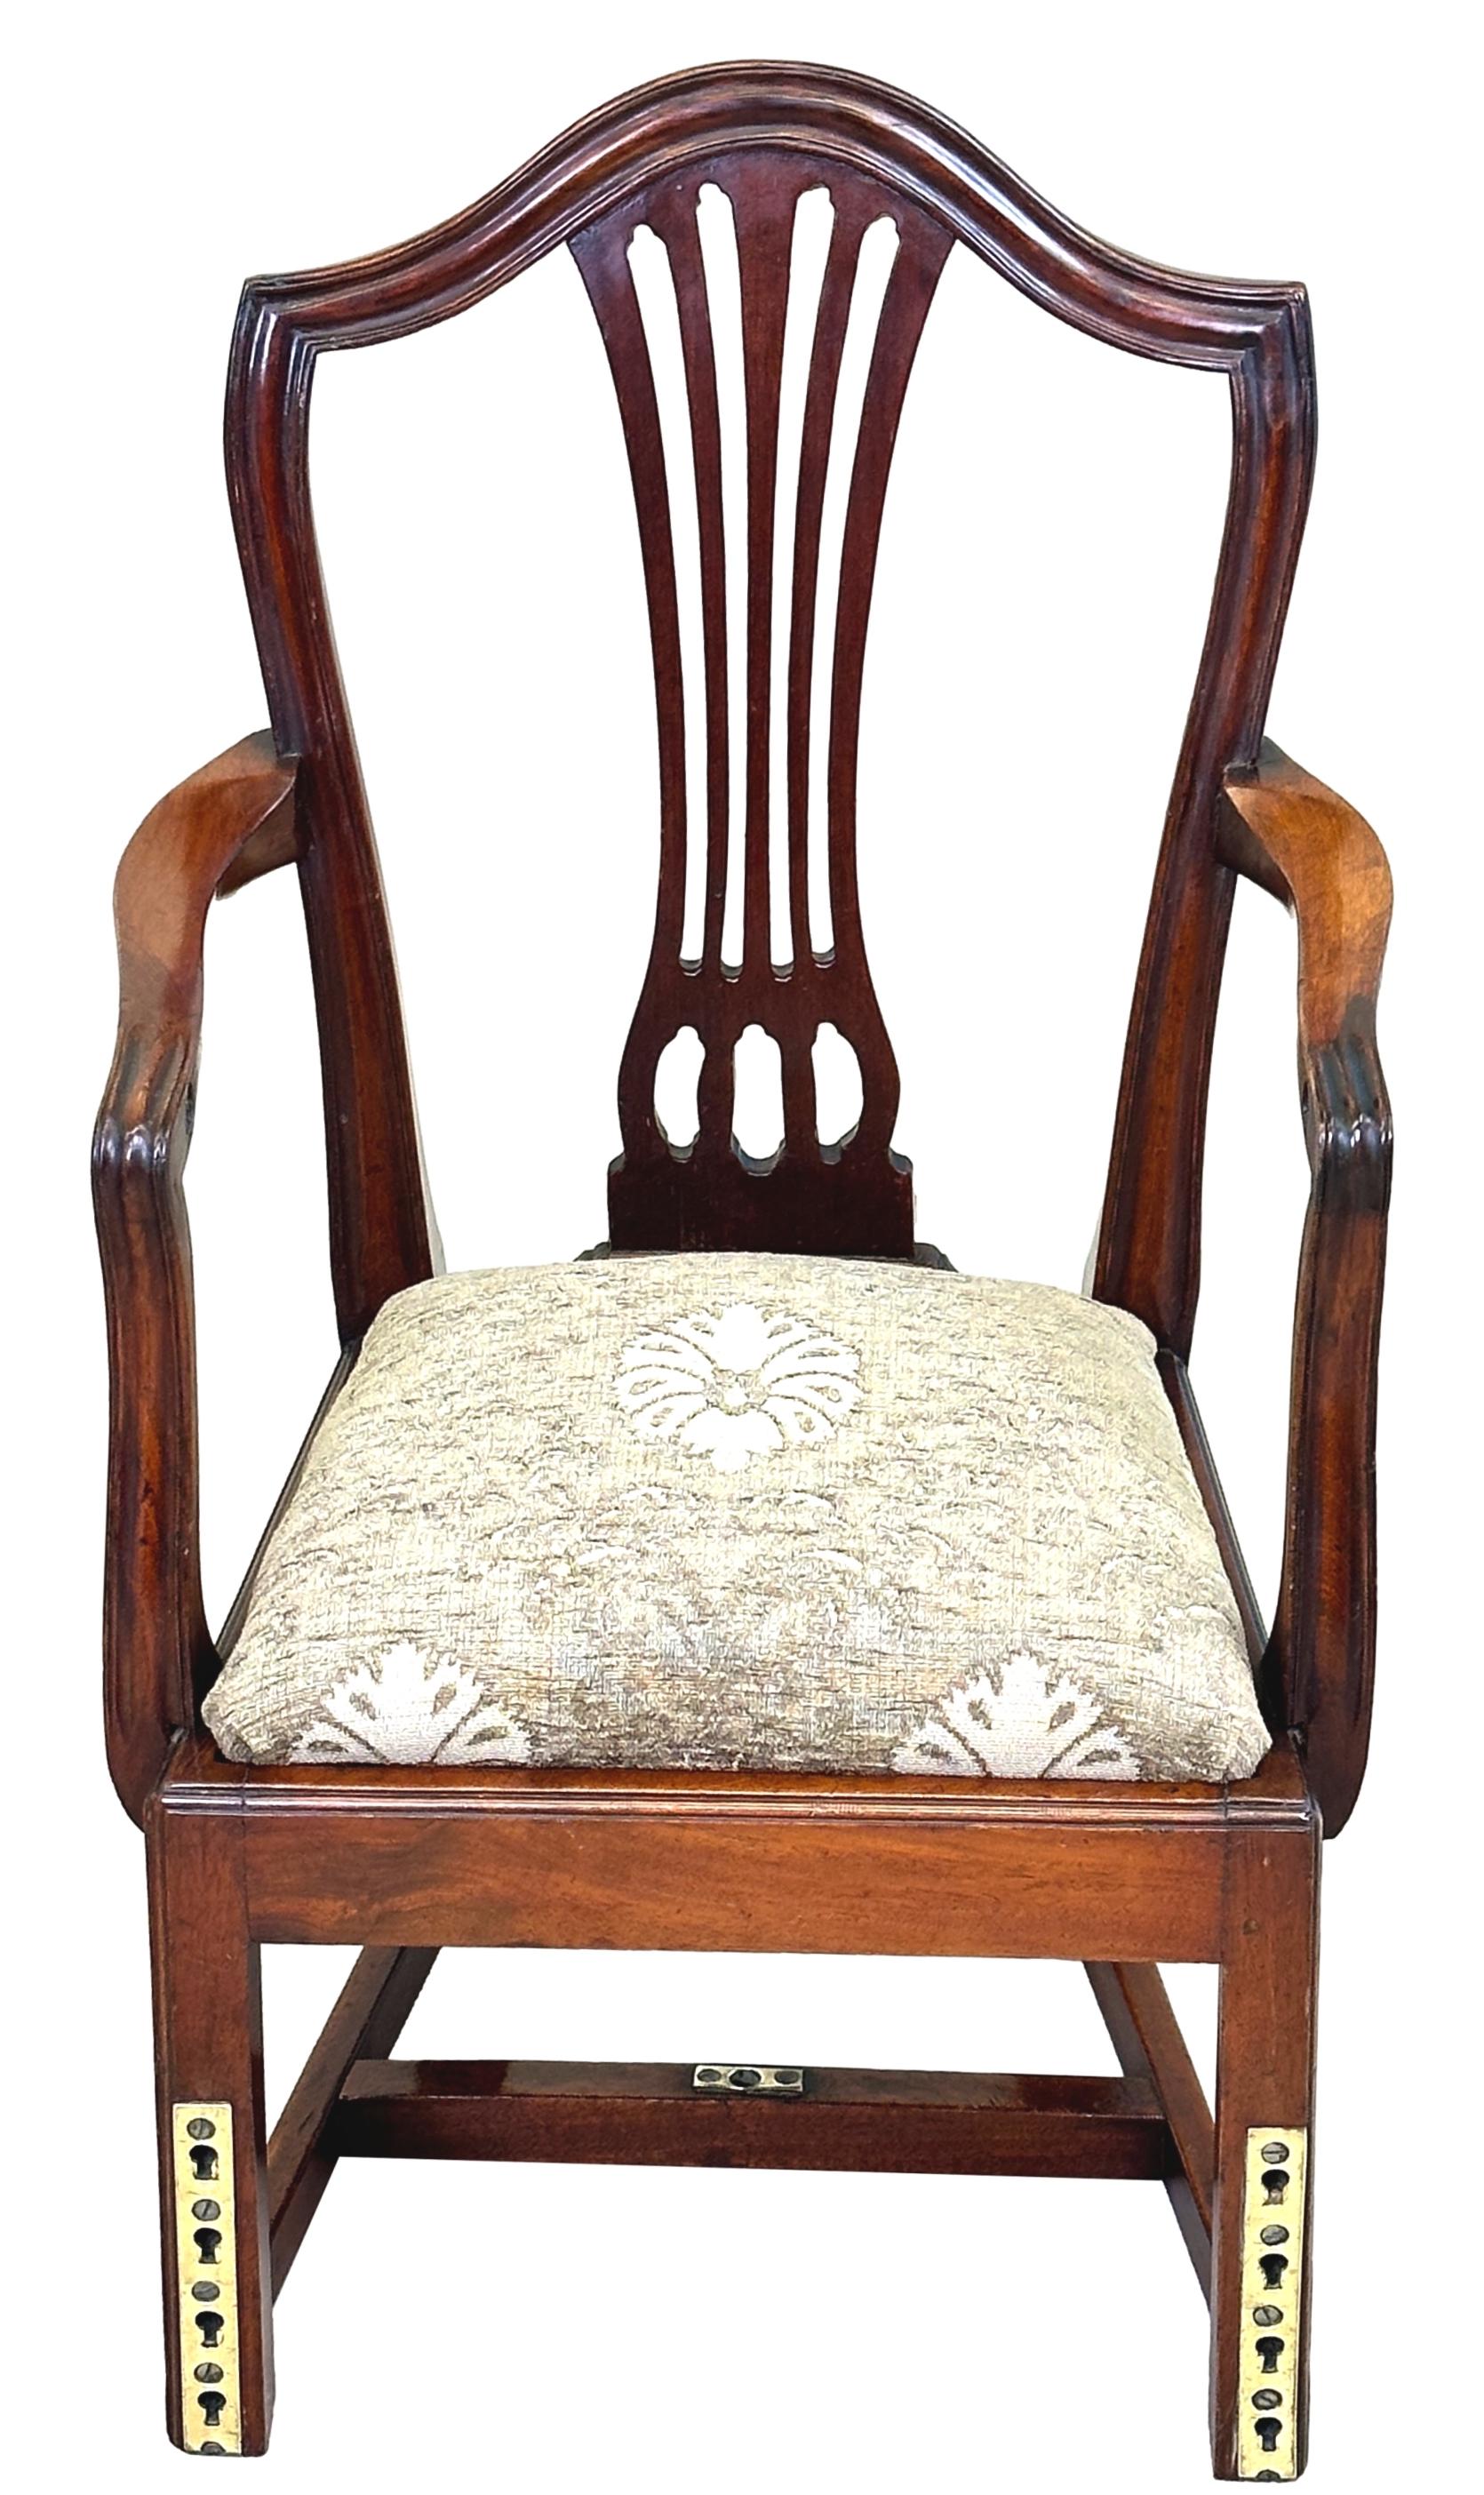 Georgian 18th Century Childs High Chair In Good Condition For Sale In Bedfordshire, GB